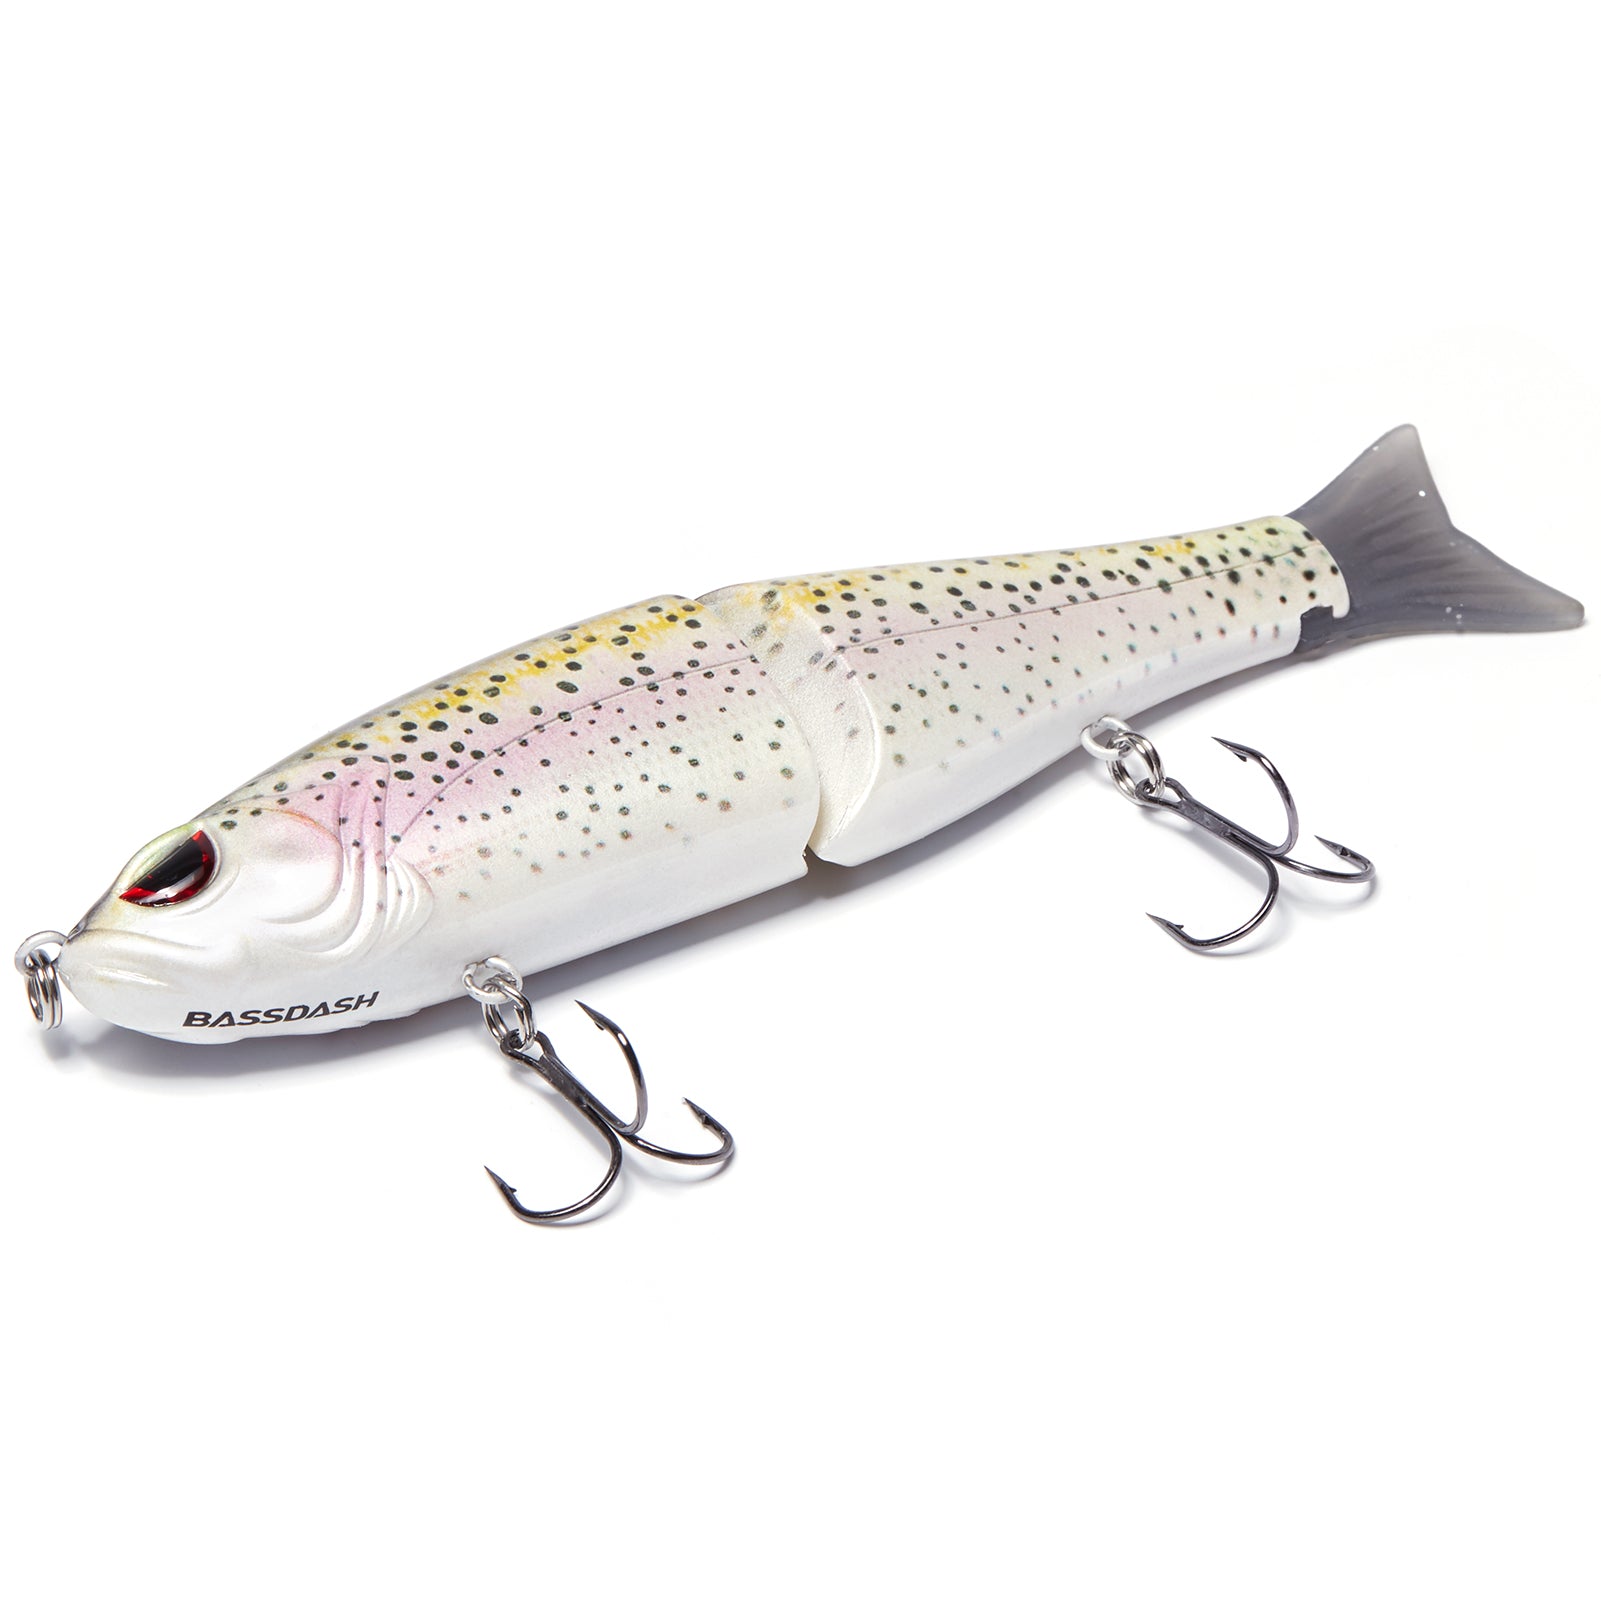 Bassdash SwimShad Glide Baits Jointed Swimbait Bass Pike Salmon Trout Muskie  Fishing Lure White Shad 7in/2.2oz